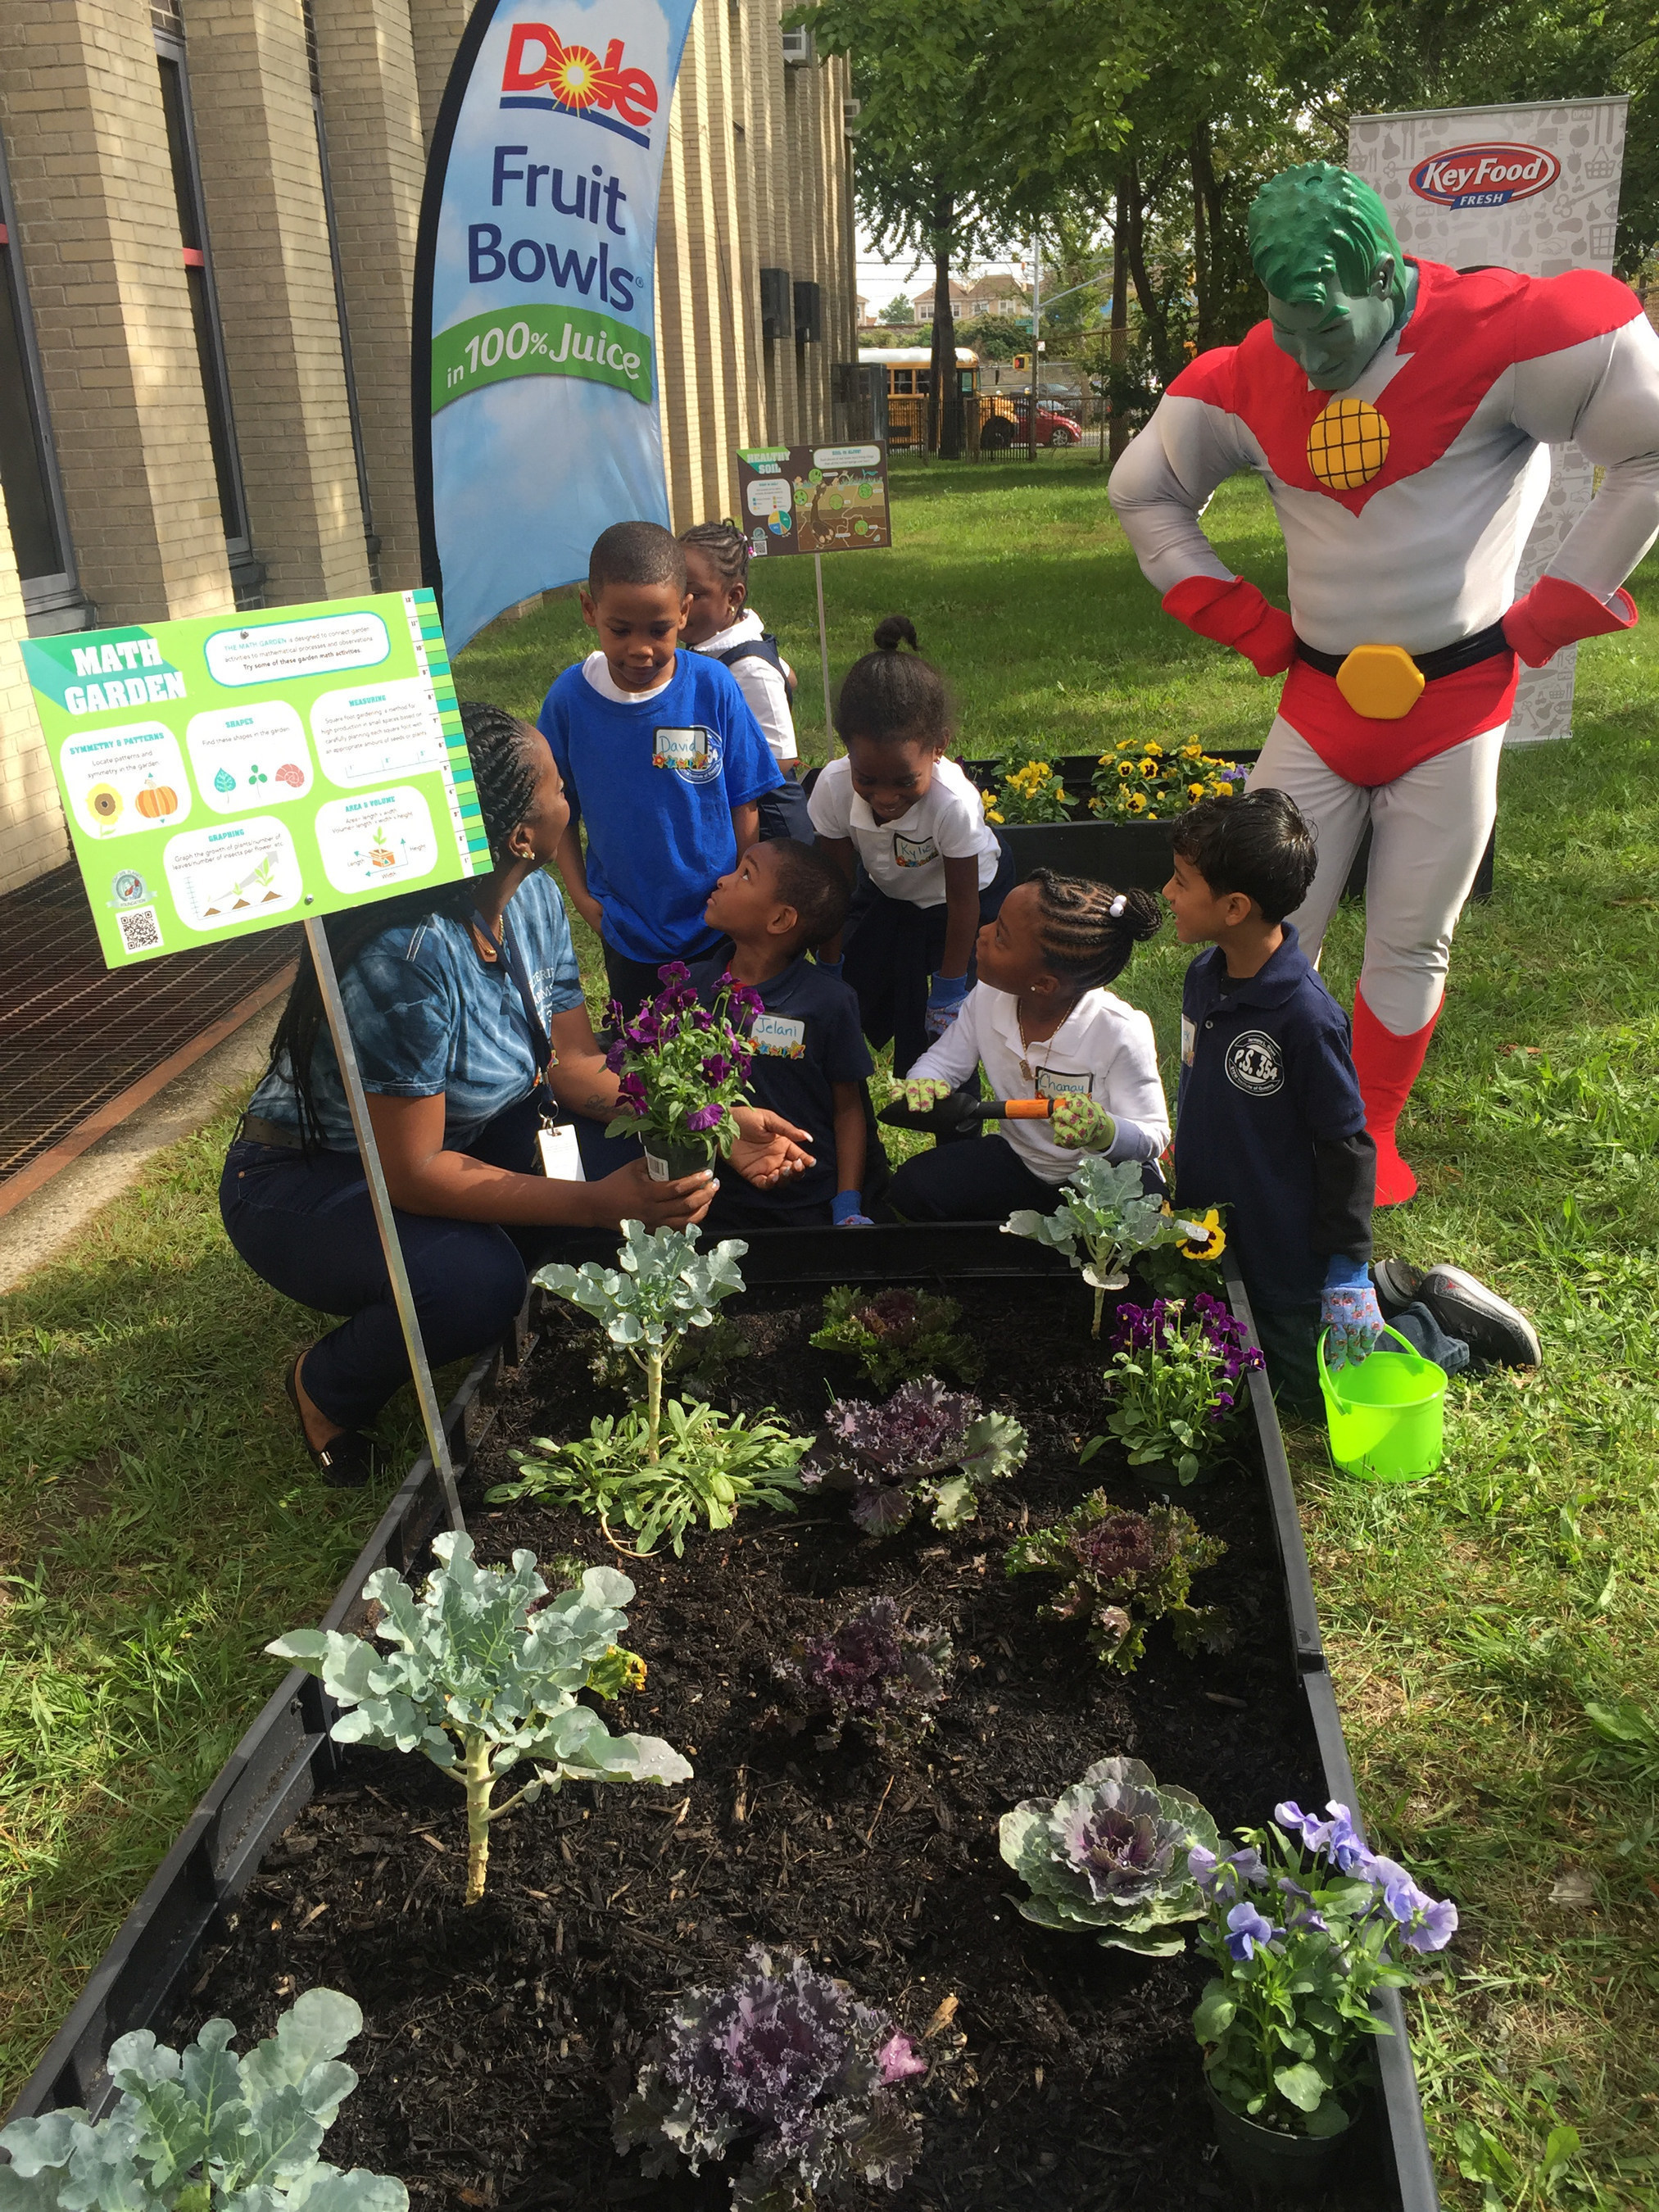 Kids from PS 354 STEM School of Queens learn first hand from their newly installed Learning Garden compliments of Dole Packaged Foods and Key Food as Captain Planet looks on.